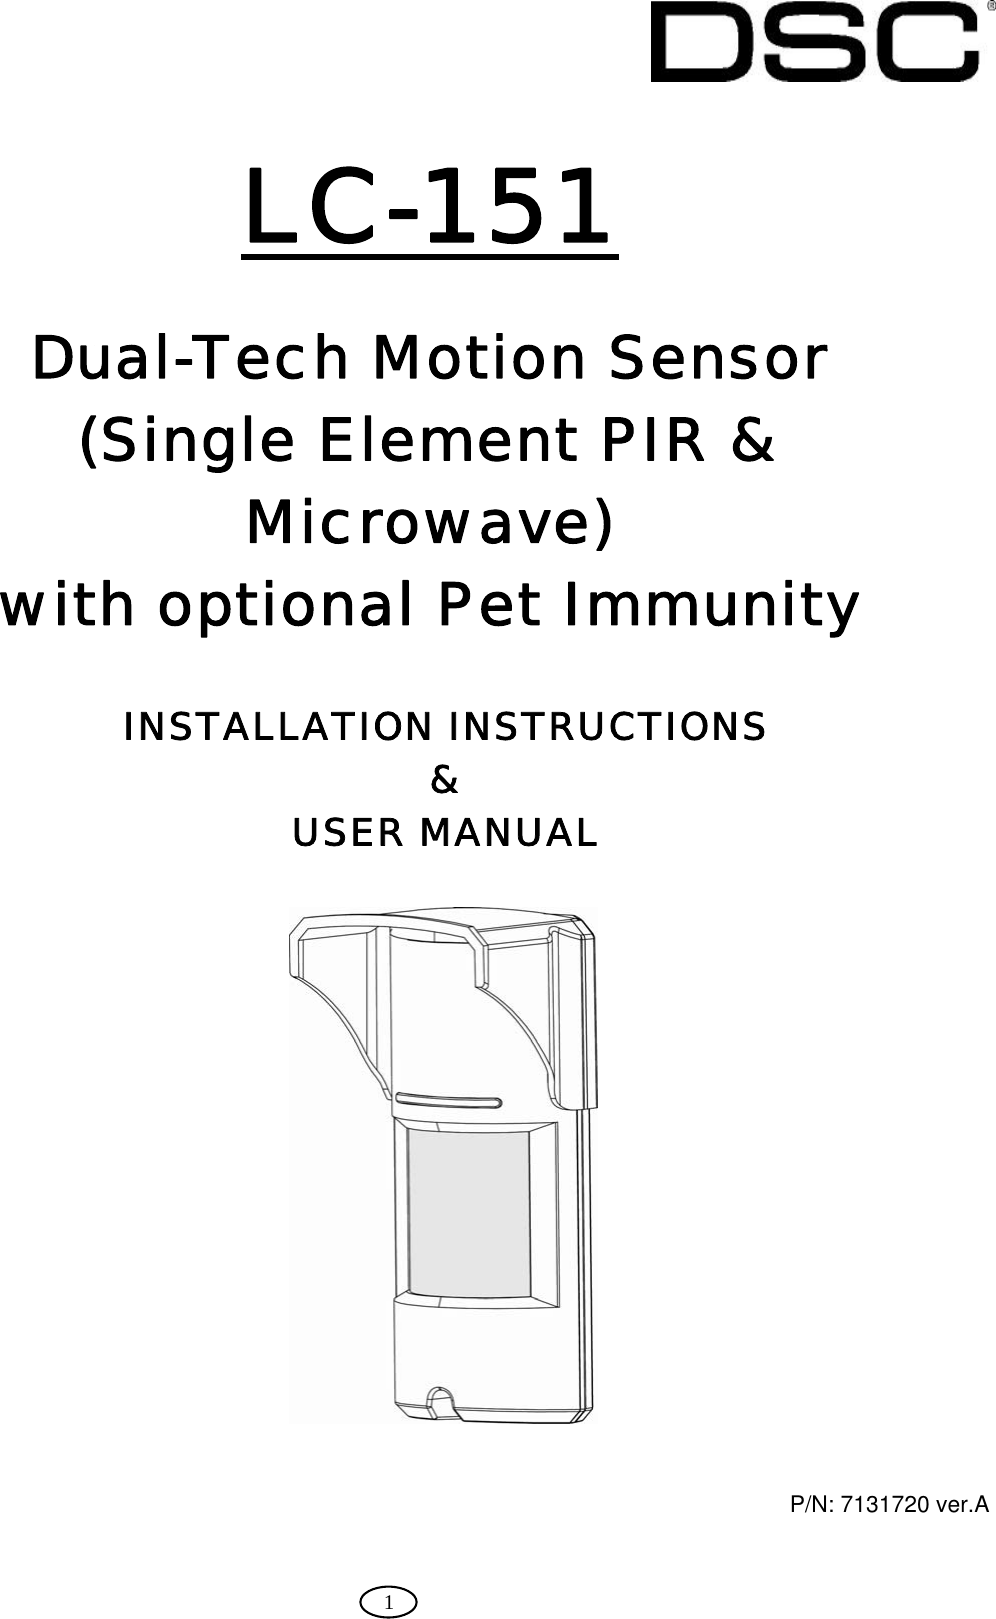  1      INSTALLATION INSTRUCTIONS &amp; USER MANUAL        P/N: 7131720 ver.A LC-151   Dual-Tech Motion Sensor (Single Element PIR &amp; Microwave)  with optional Pet Immunity 